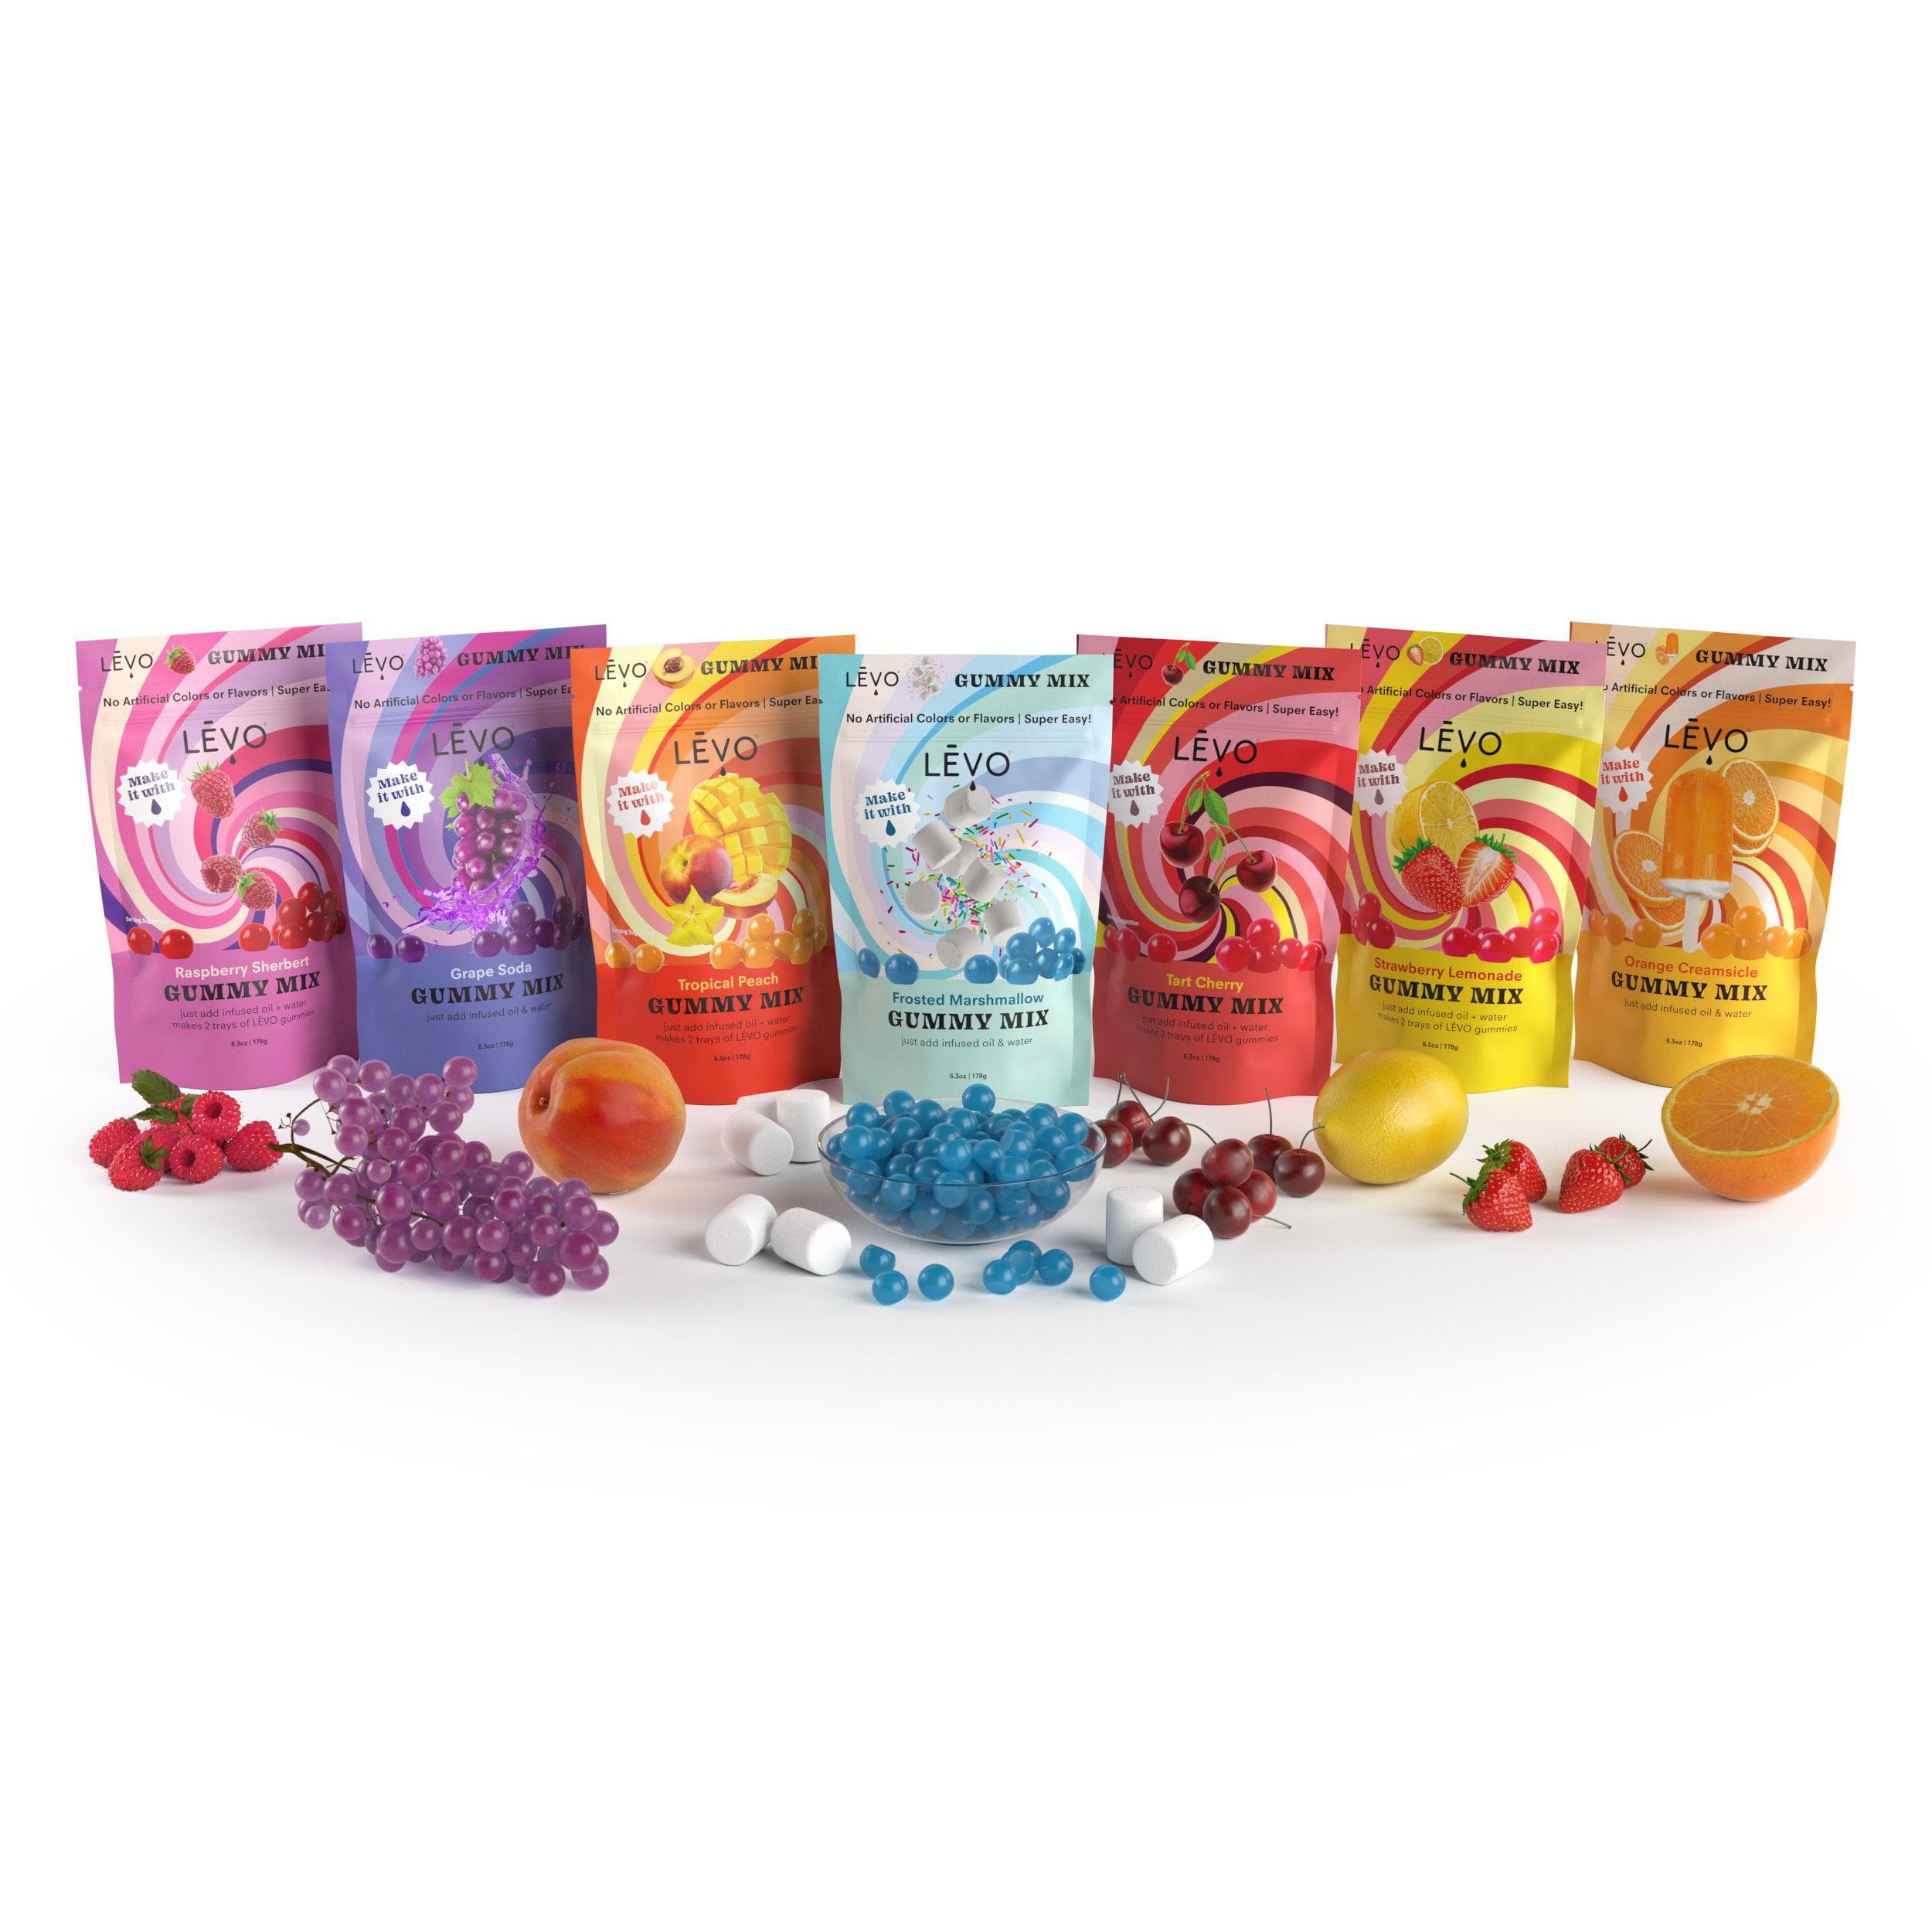 Grape, Marshmallow, and Orange Gummy Mixes. Buy 3 Flavors at Once & SAVE!